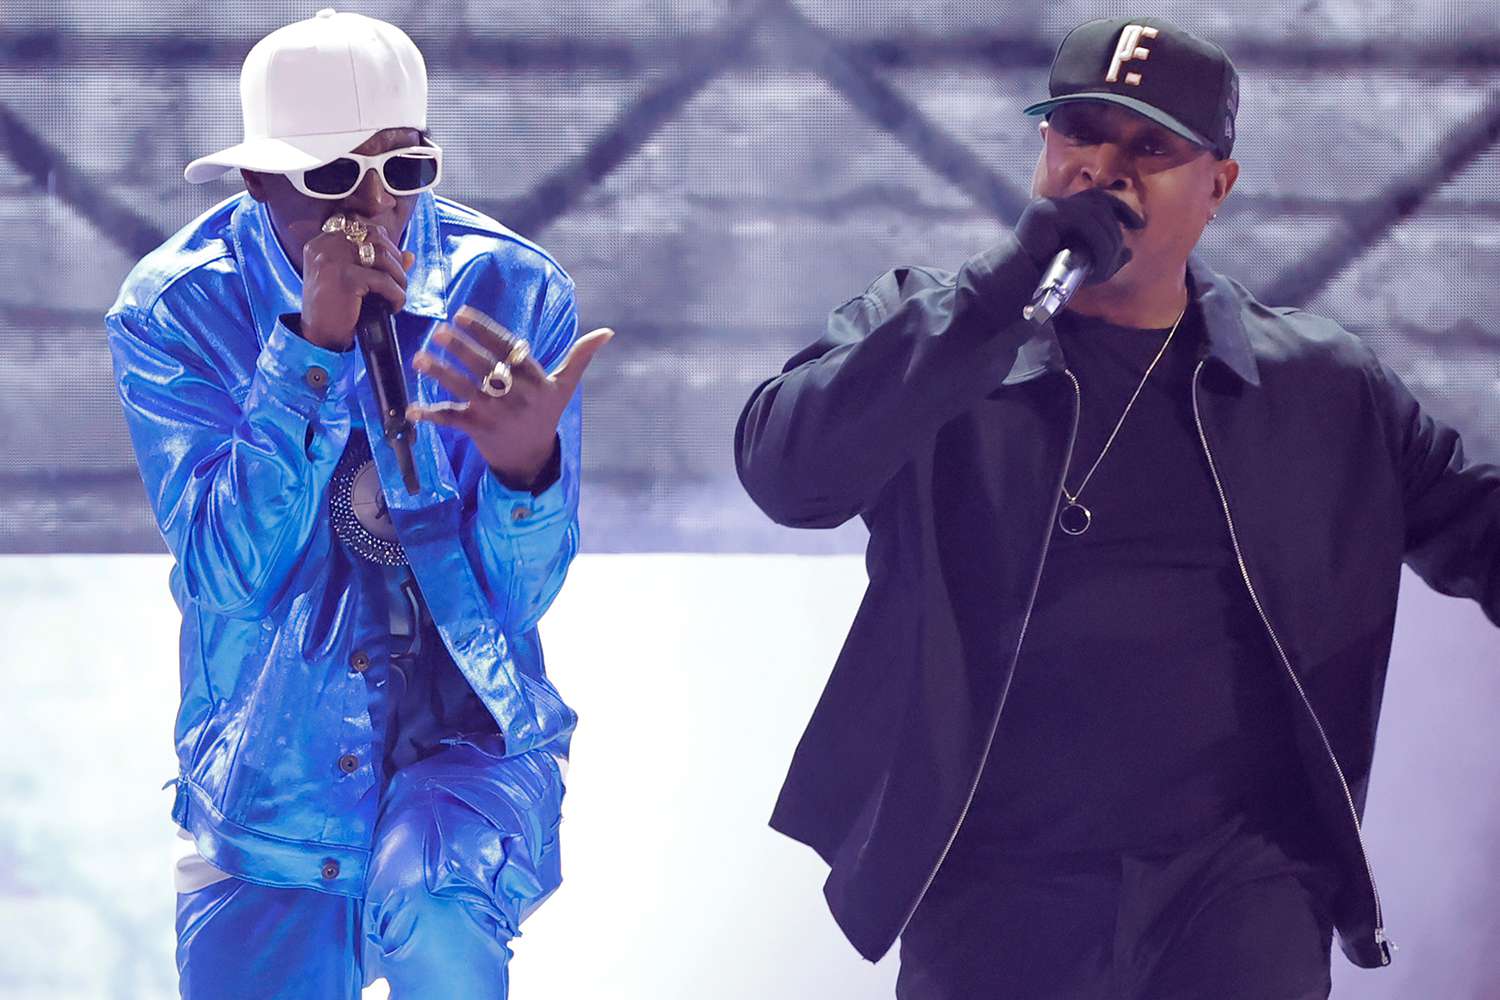 Flavor Flav and Chuck D of Public Enemy perform onstage during the 65th GRAMMY Awards at Crypto.com Arena on February 05, 2023 in Los Angeles, California.